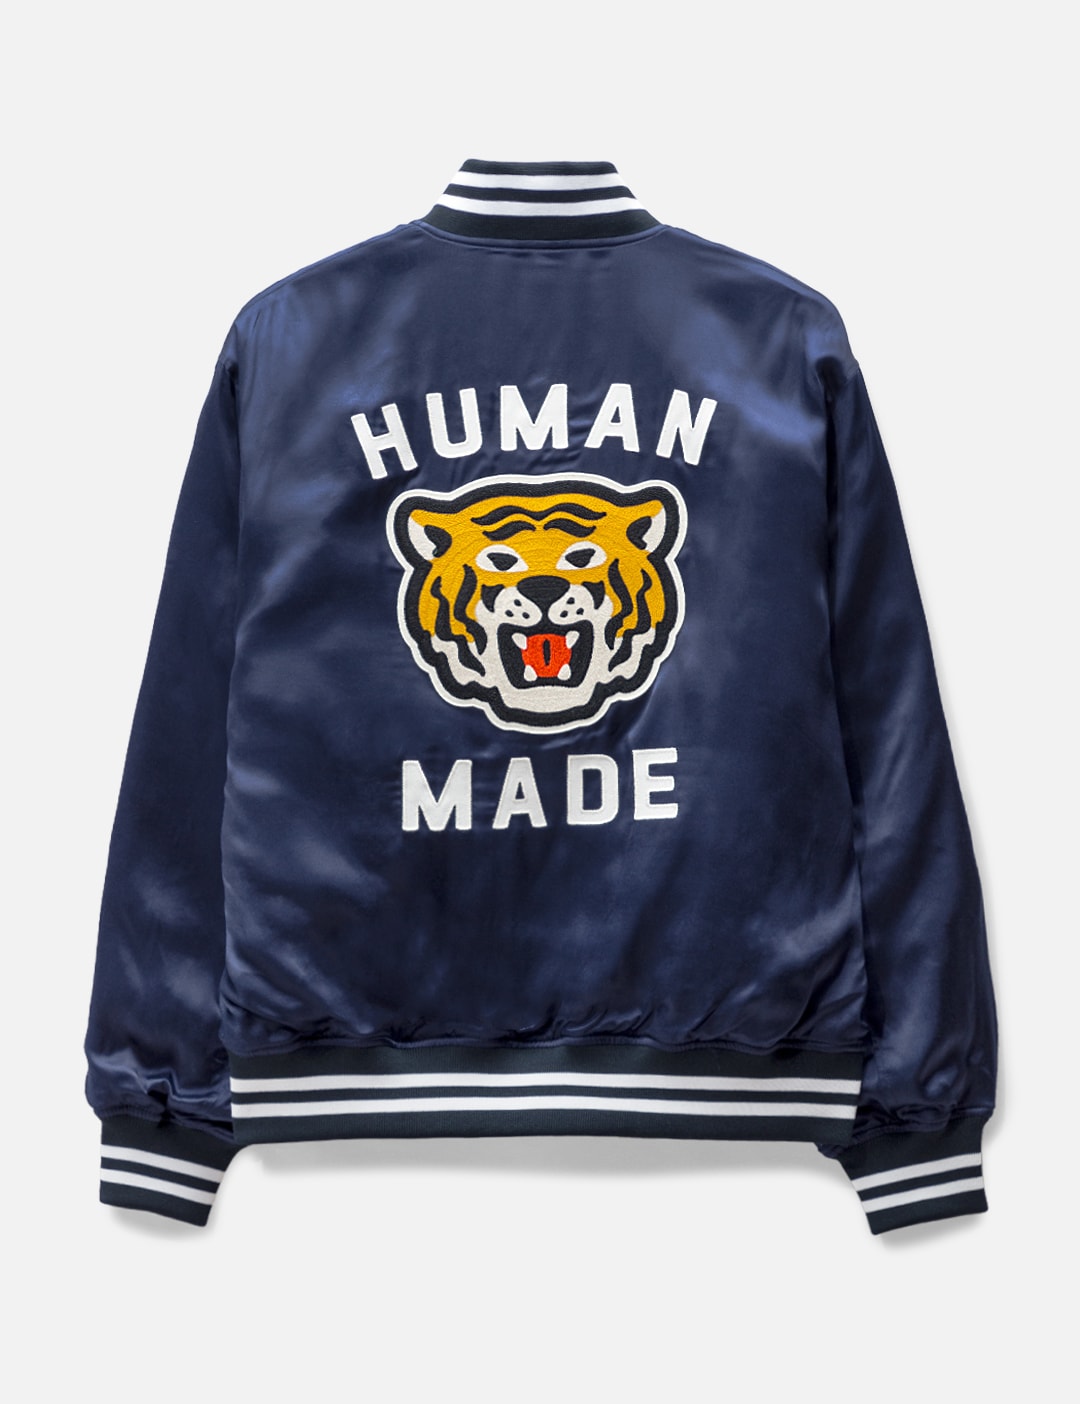 Human Made - STADIUM JACKET | HBX - Globally Curated Fashion and Lifestyle  by Hypebeast